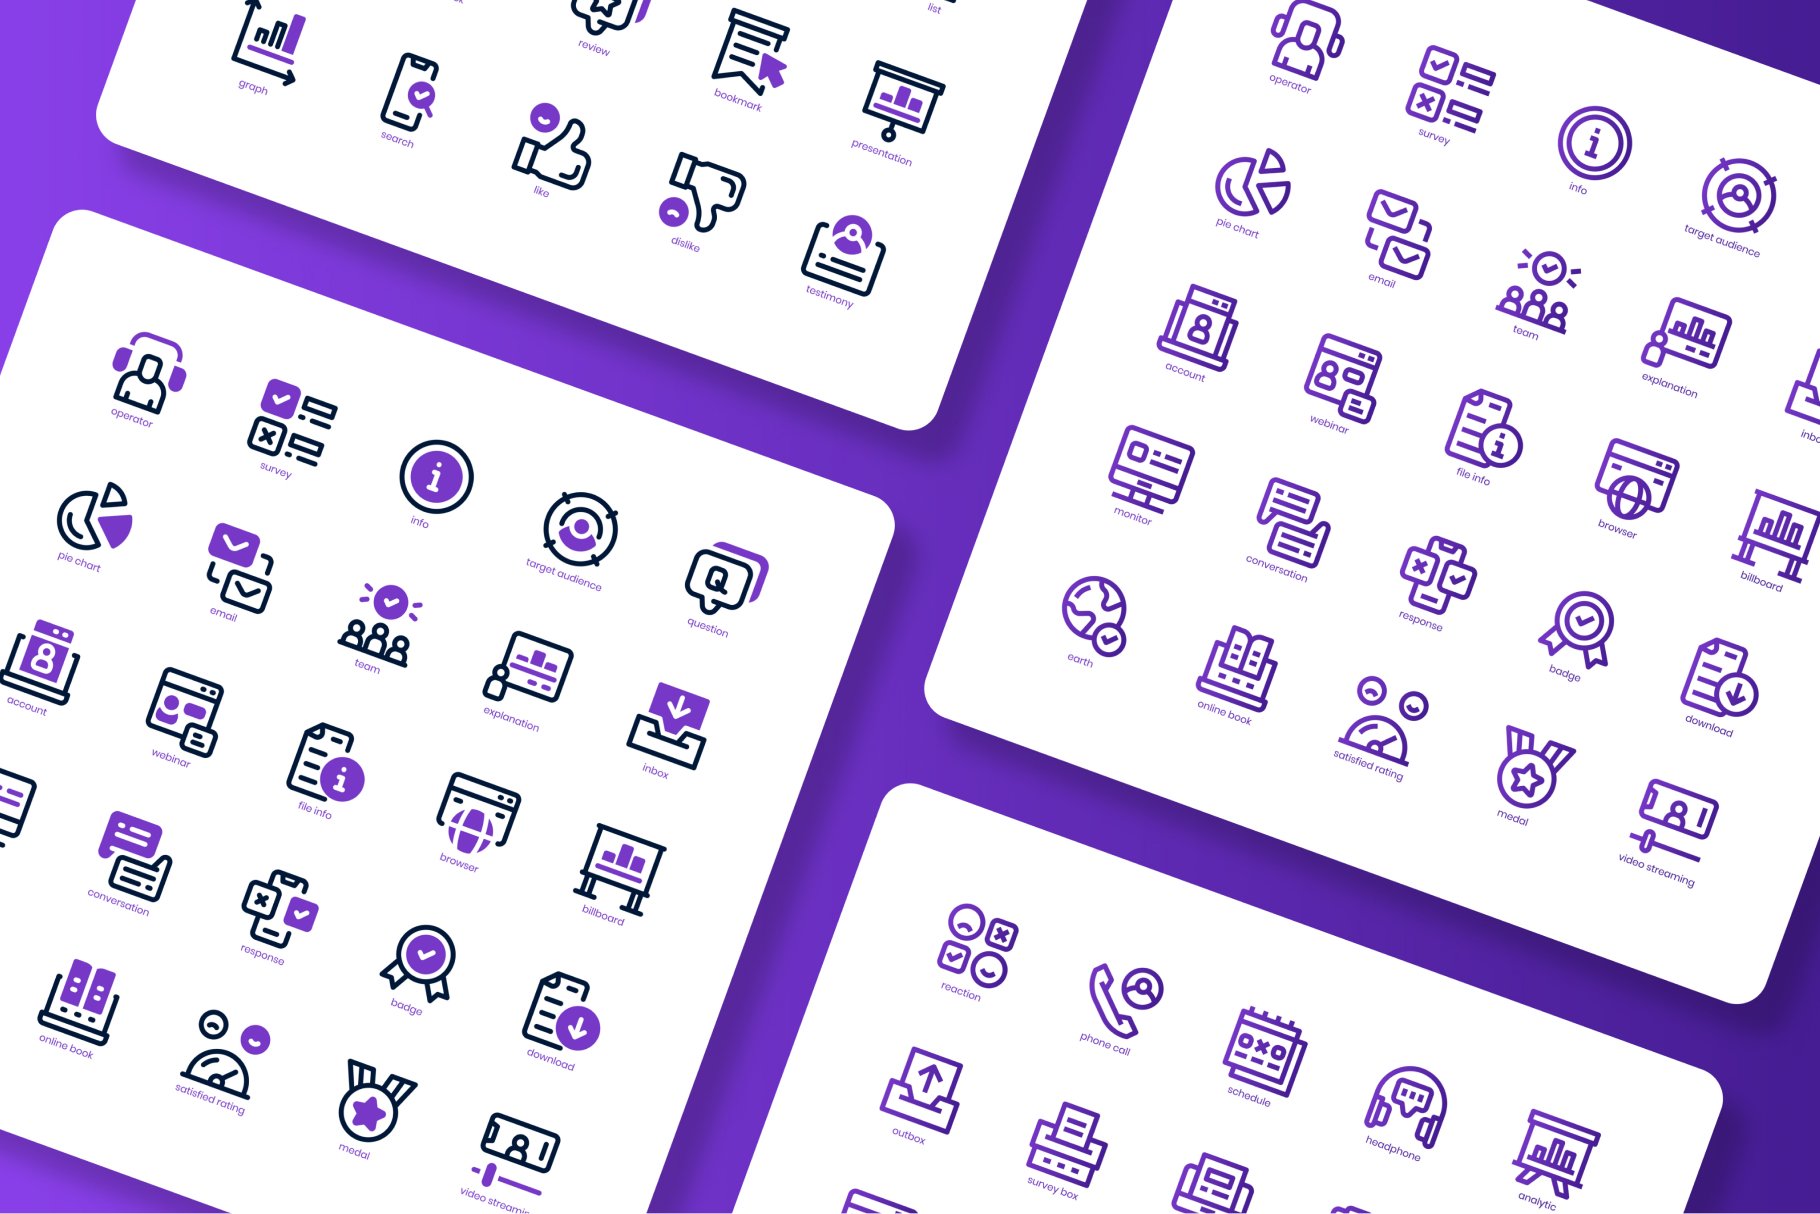 office 2022 icon pack